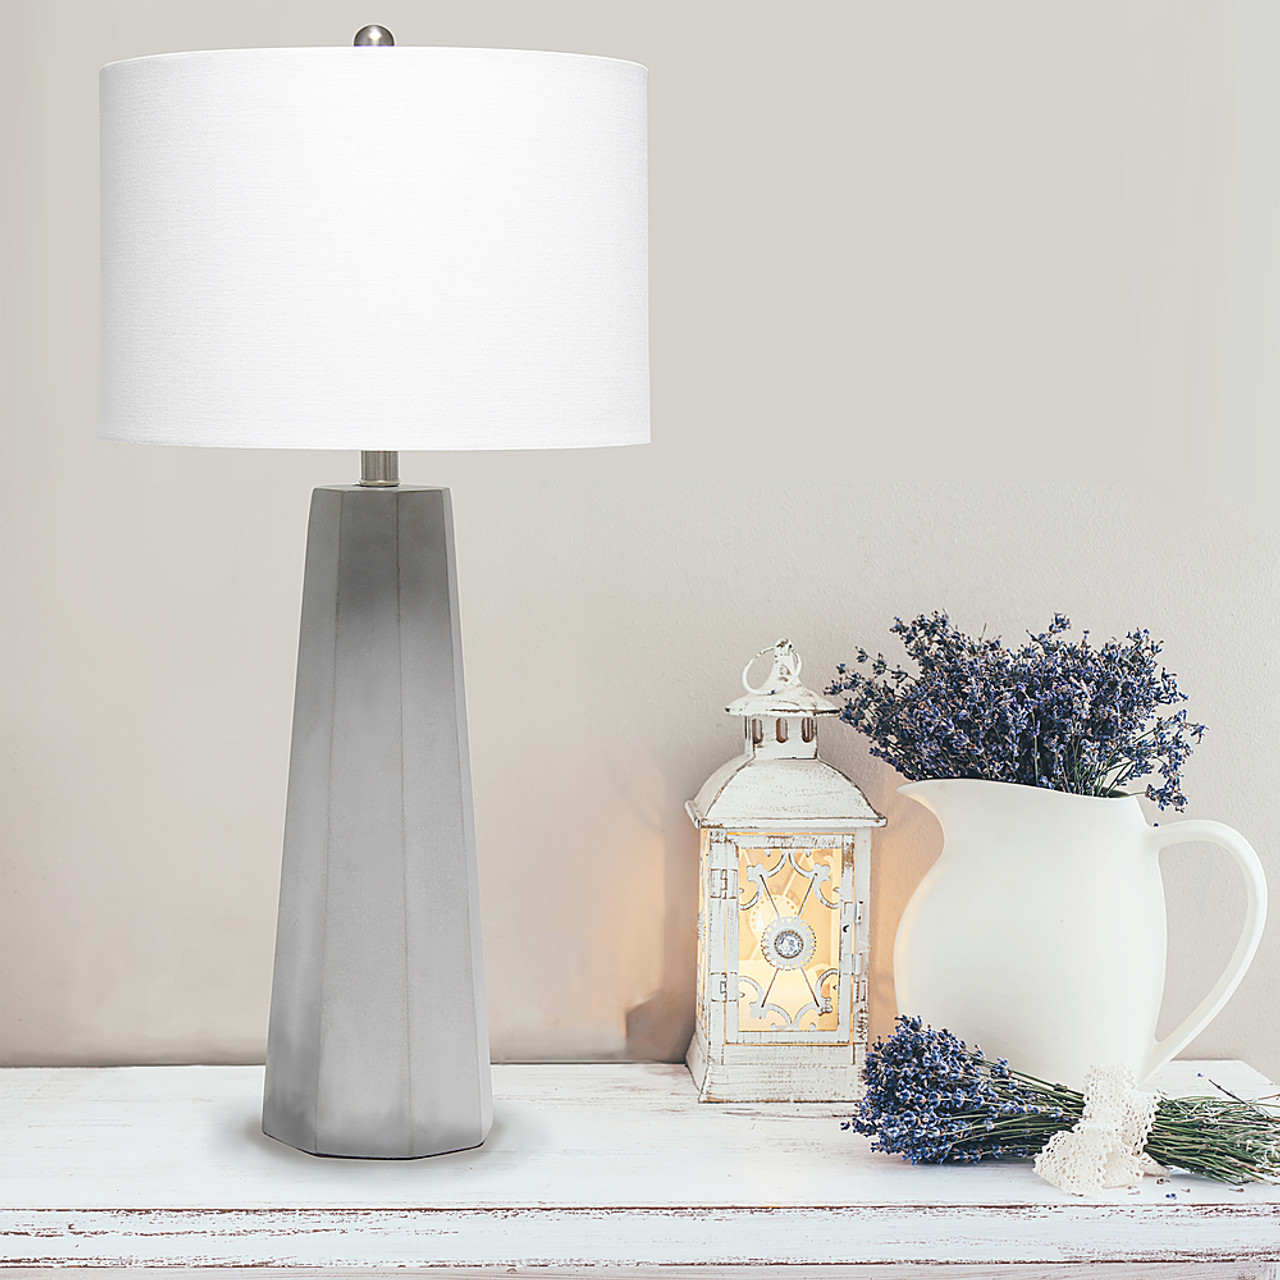 Lalia Home Concrete Pillar Table Lamp with White Fabric Shade